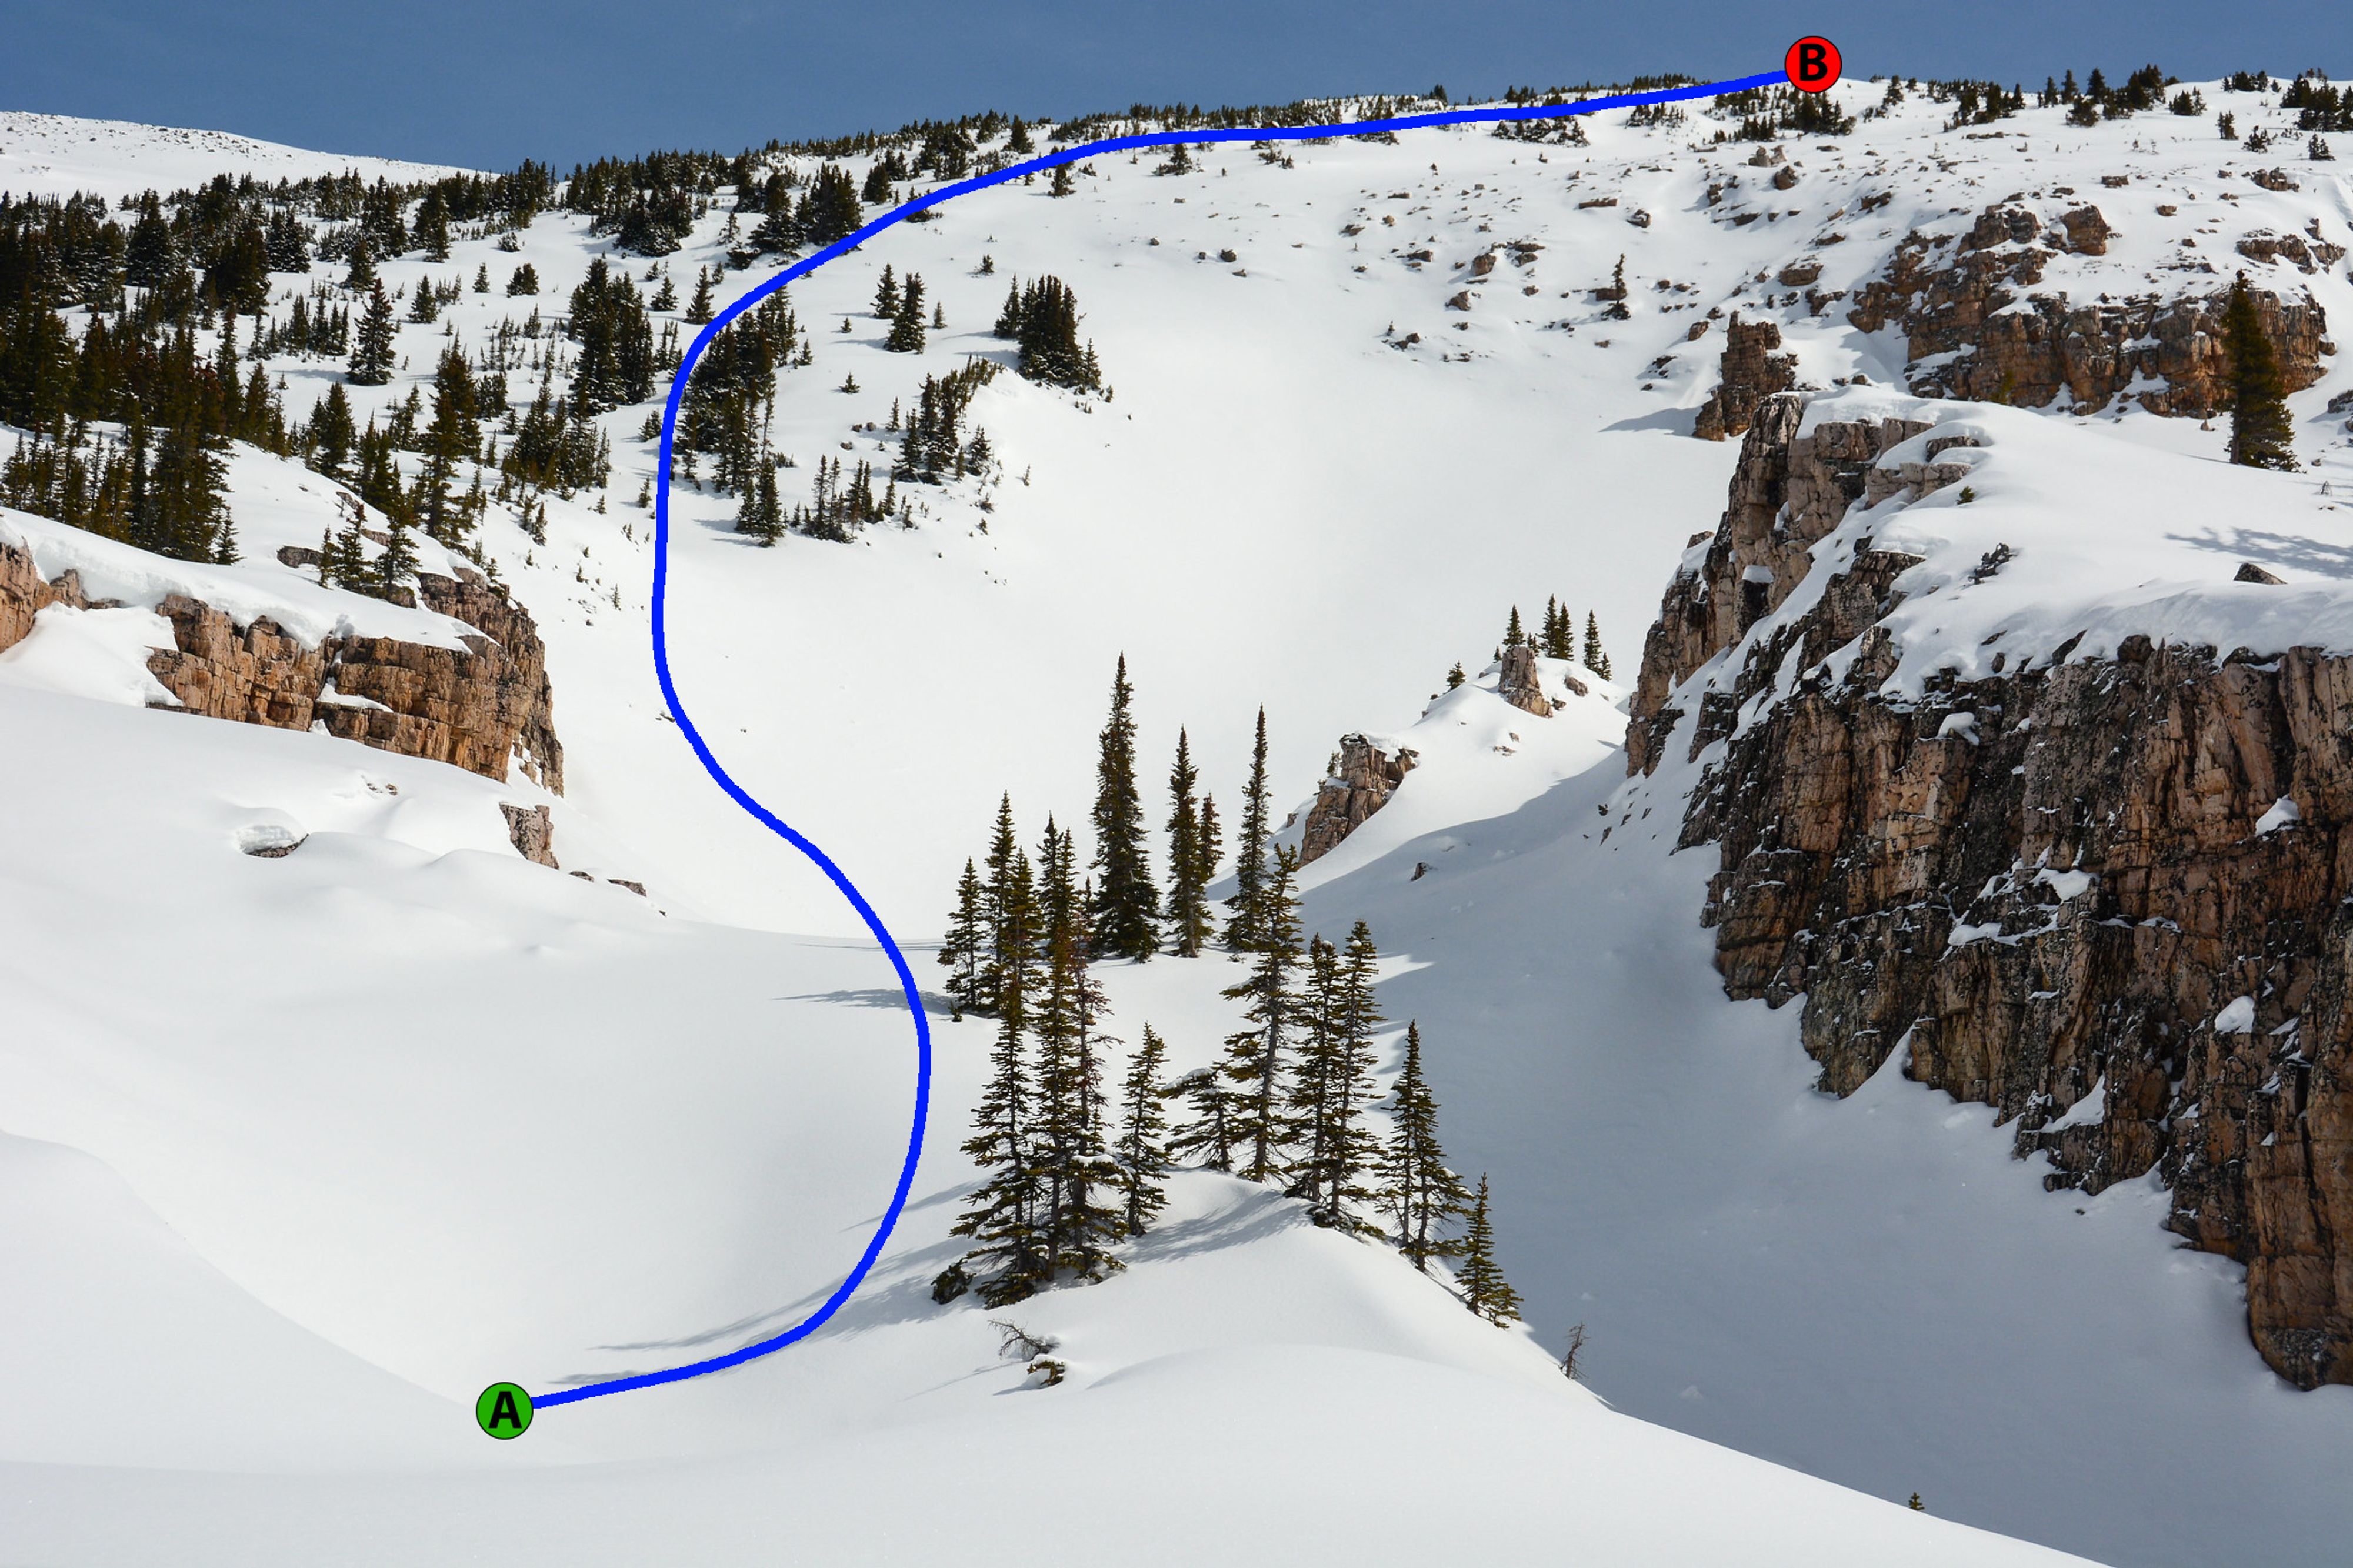 This is simple terrain. The avalanche danger is moderate at all elevations.